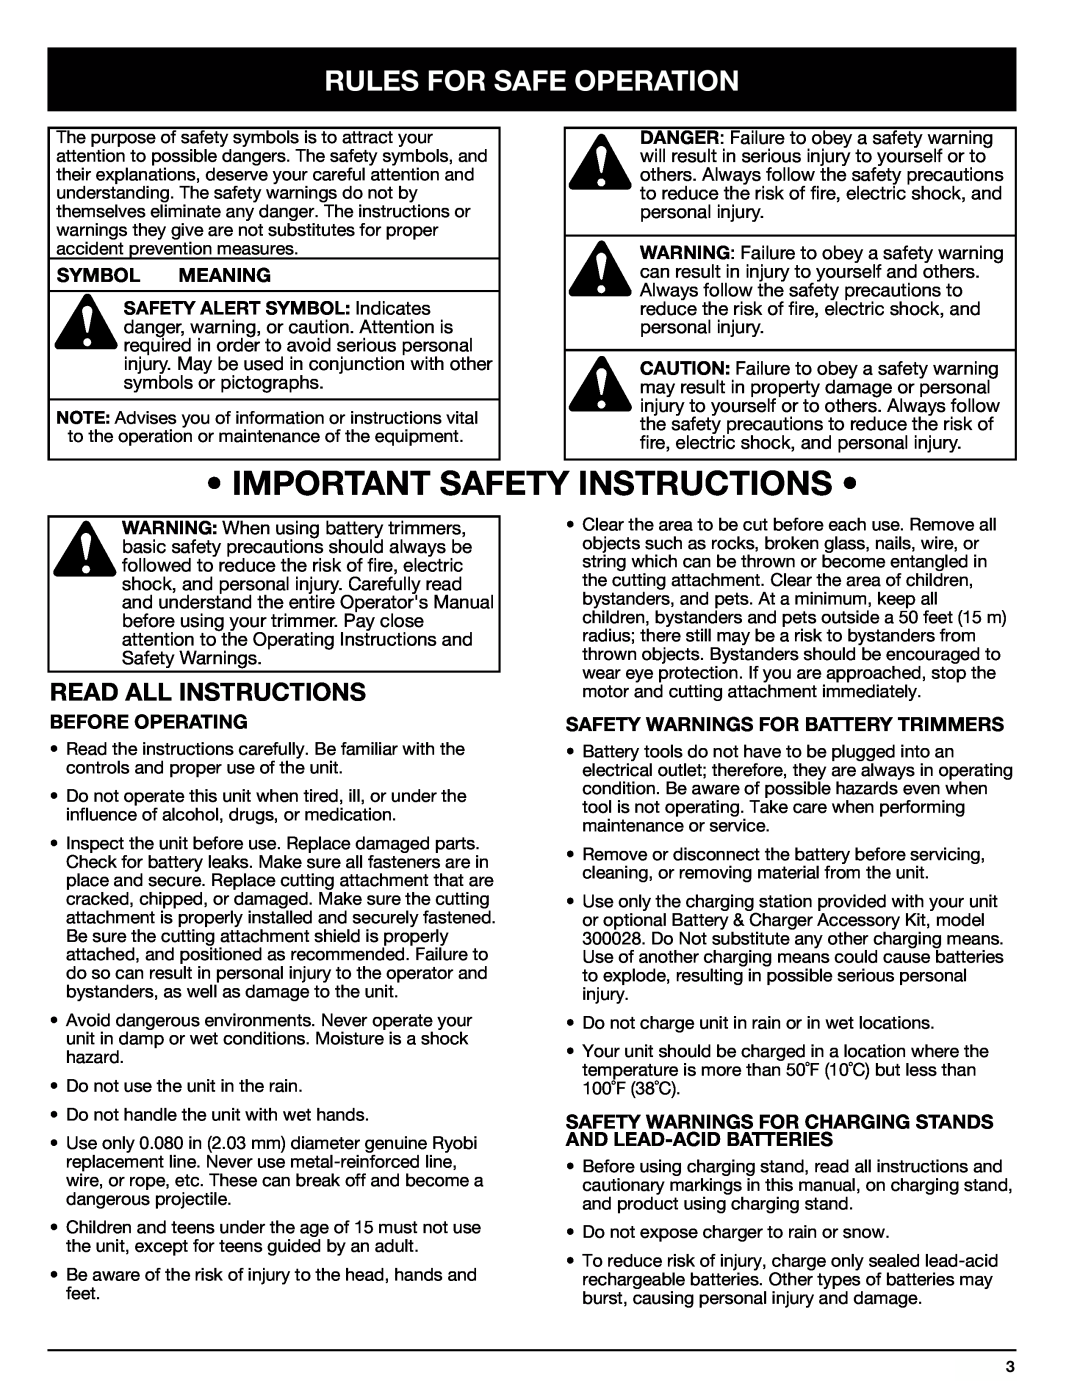 Ryobi 155r manual Rules For Safe Operation, Read All Instructions, Symbol Meaning, Before Operating 